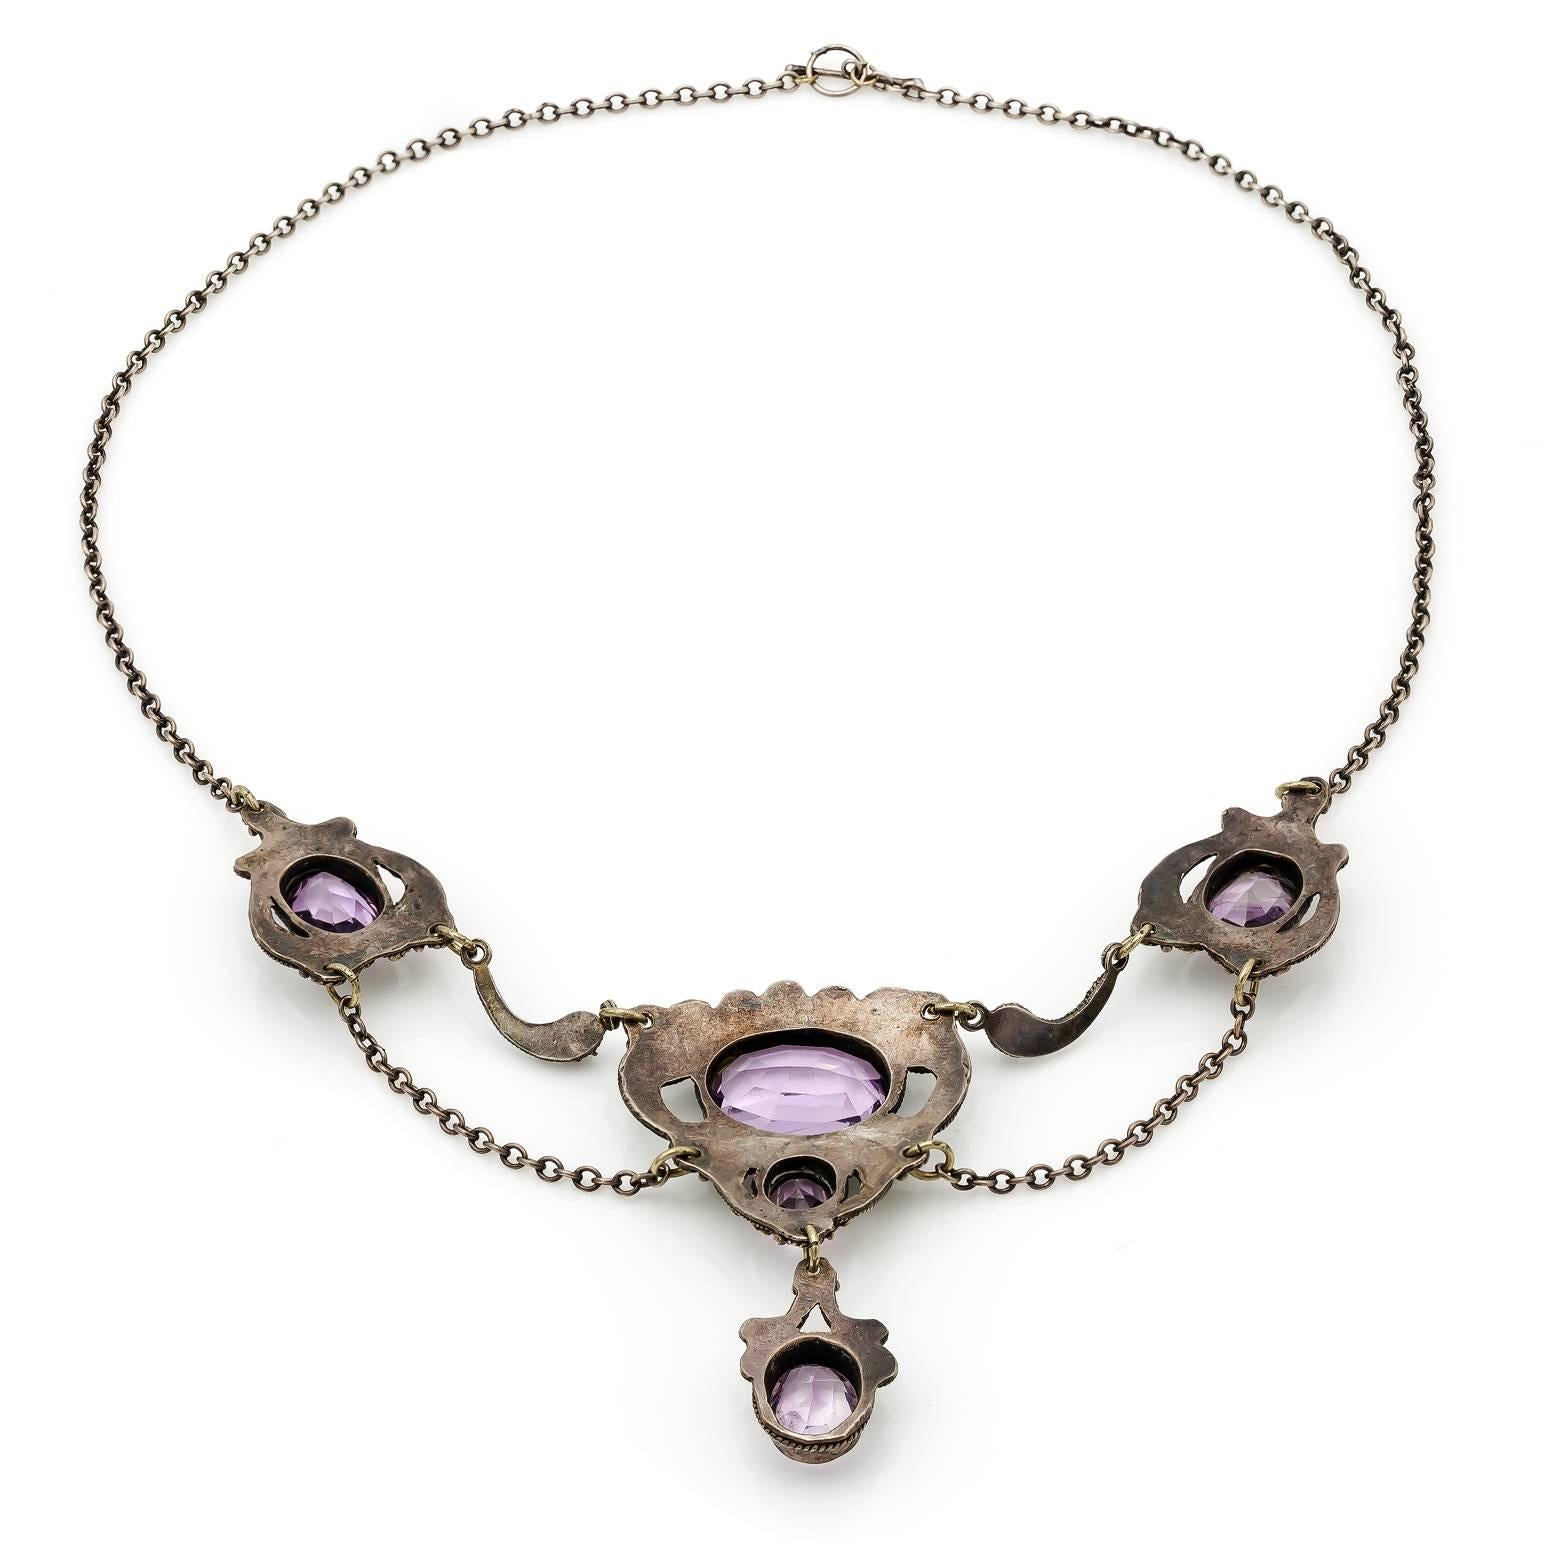 Five gorgeous faceted oval amethysts are held in this highly detailed sterling silver filigree necklace. Handmade and stunning this necklace was made in the 1920's and is a delight to swoon over. Comfortable, elegant and rich in color! 